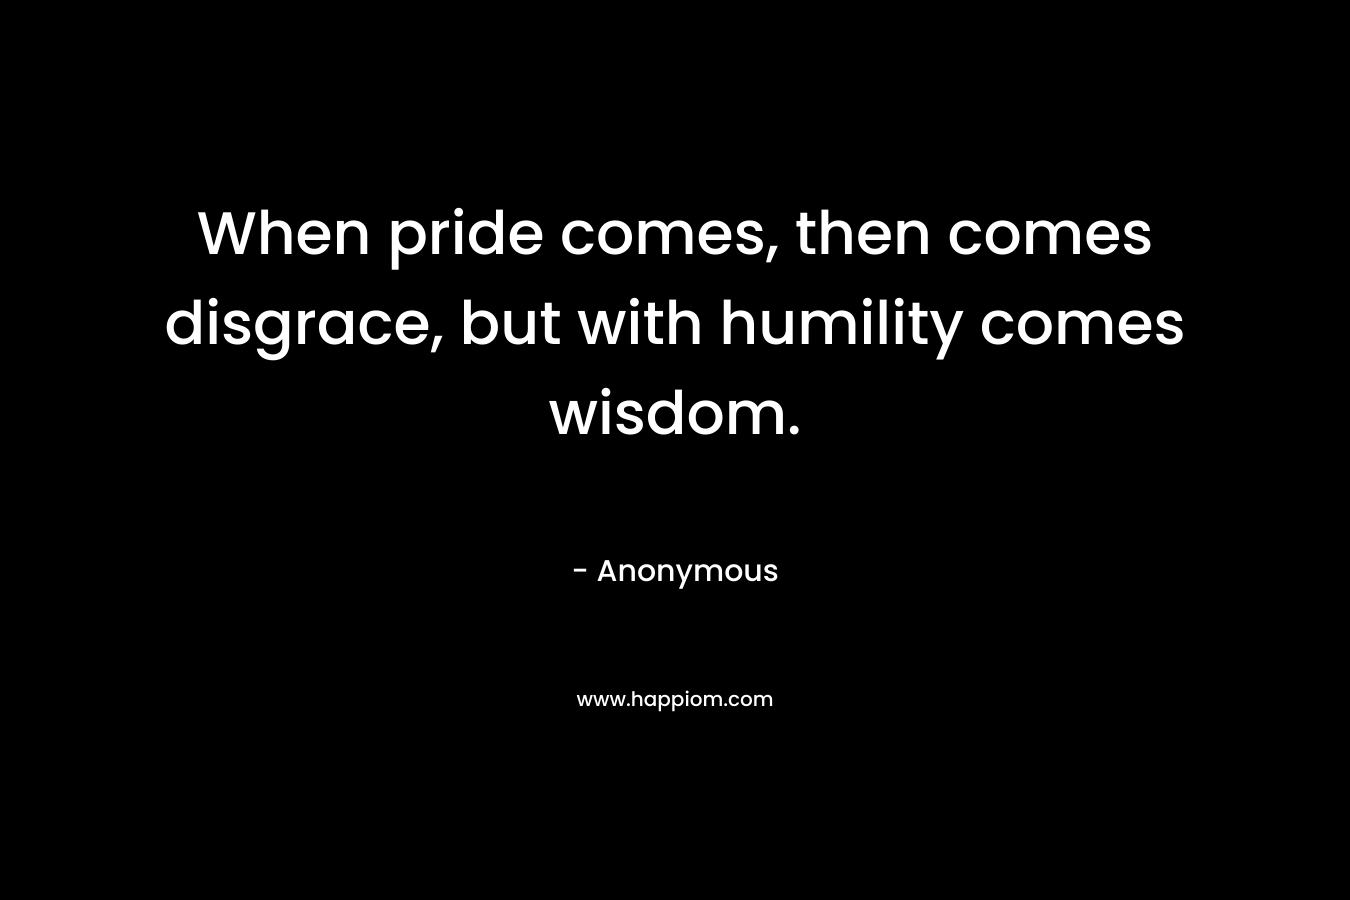 When pride comes, then comes disgrace, but with humility comes wisdom. – Anonymous